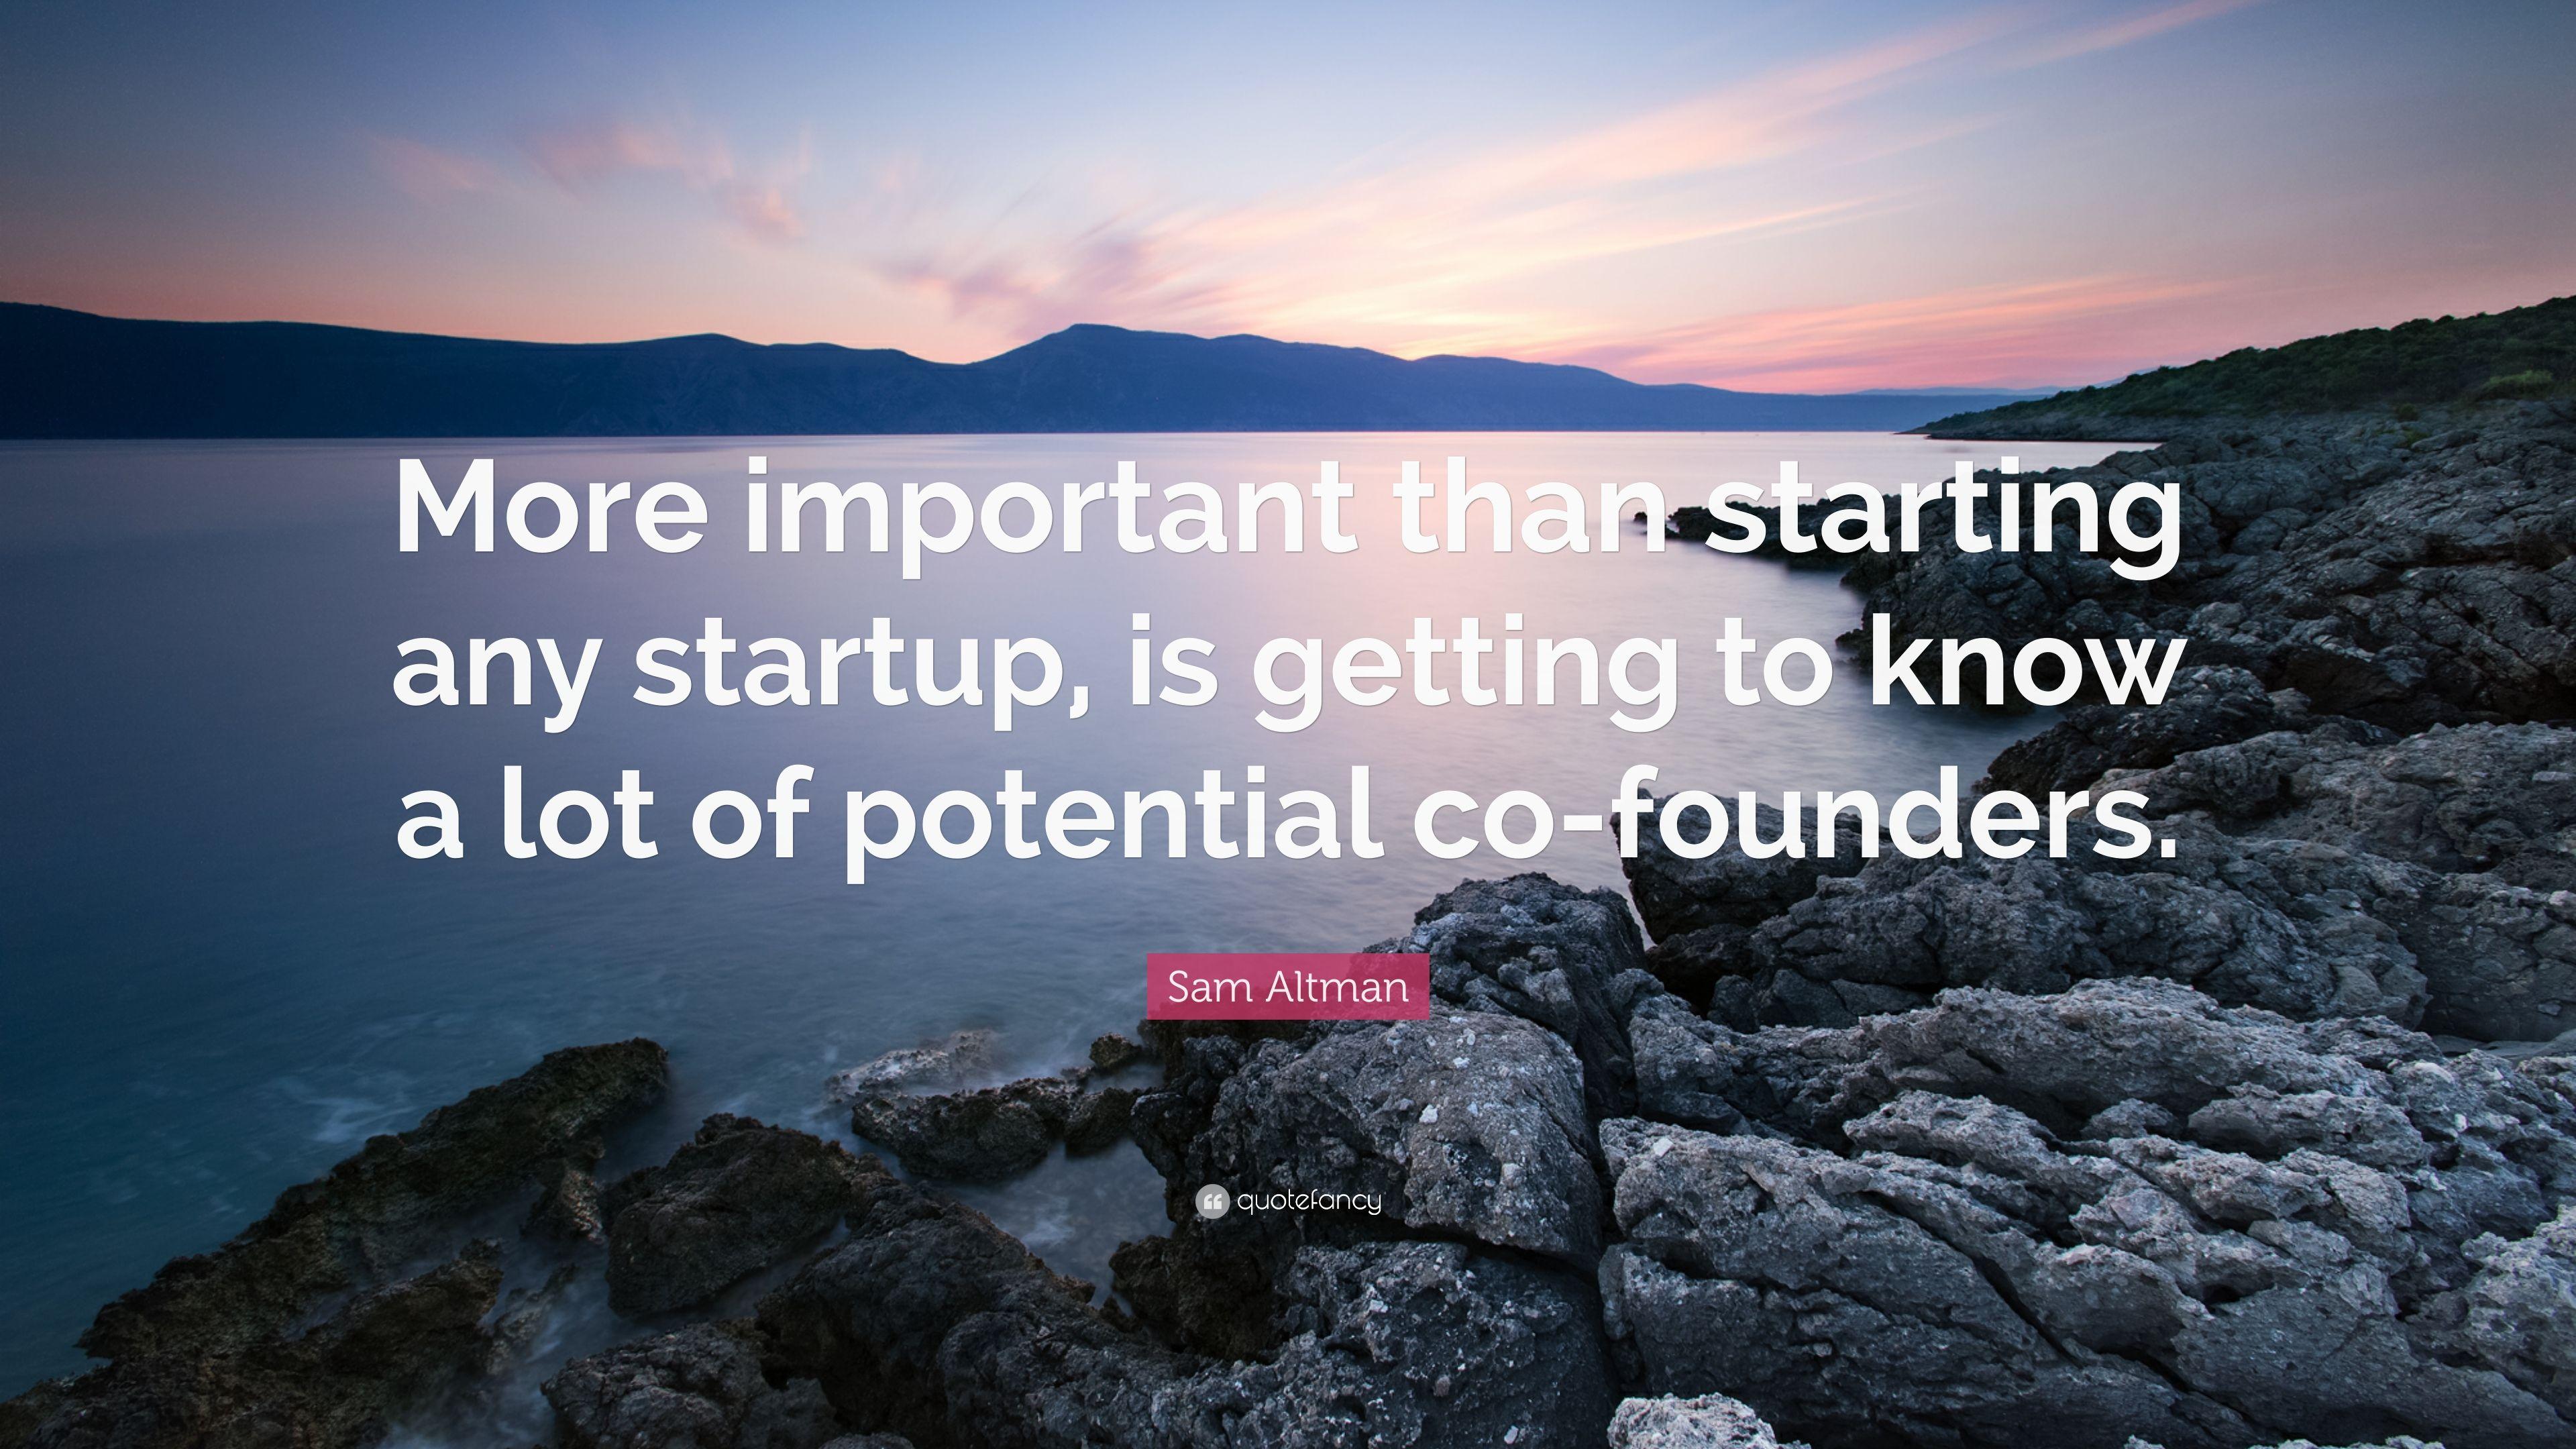 Sam Altman Quote: “More important than starting any startup, is